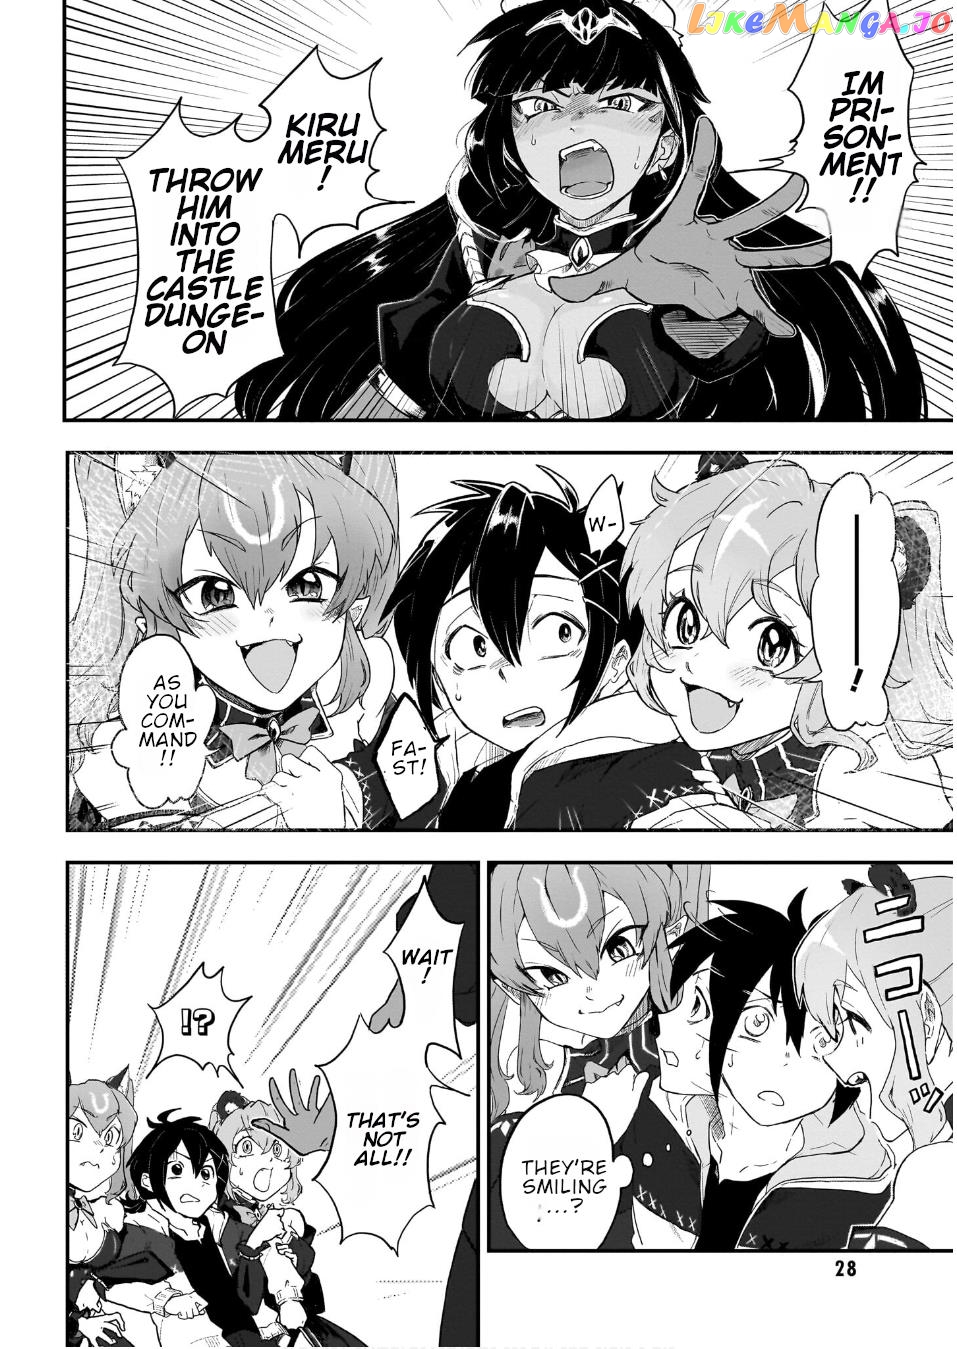 Even If I Was Reincarnated Into This Cruel World, My Cuteness Will Save Everyone! chapter 1 - page 28